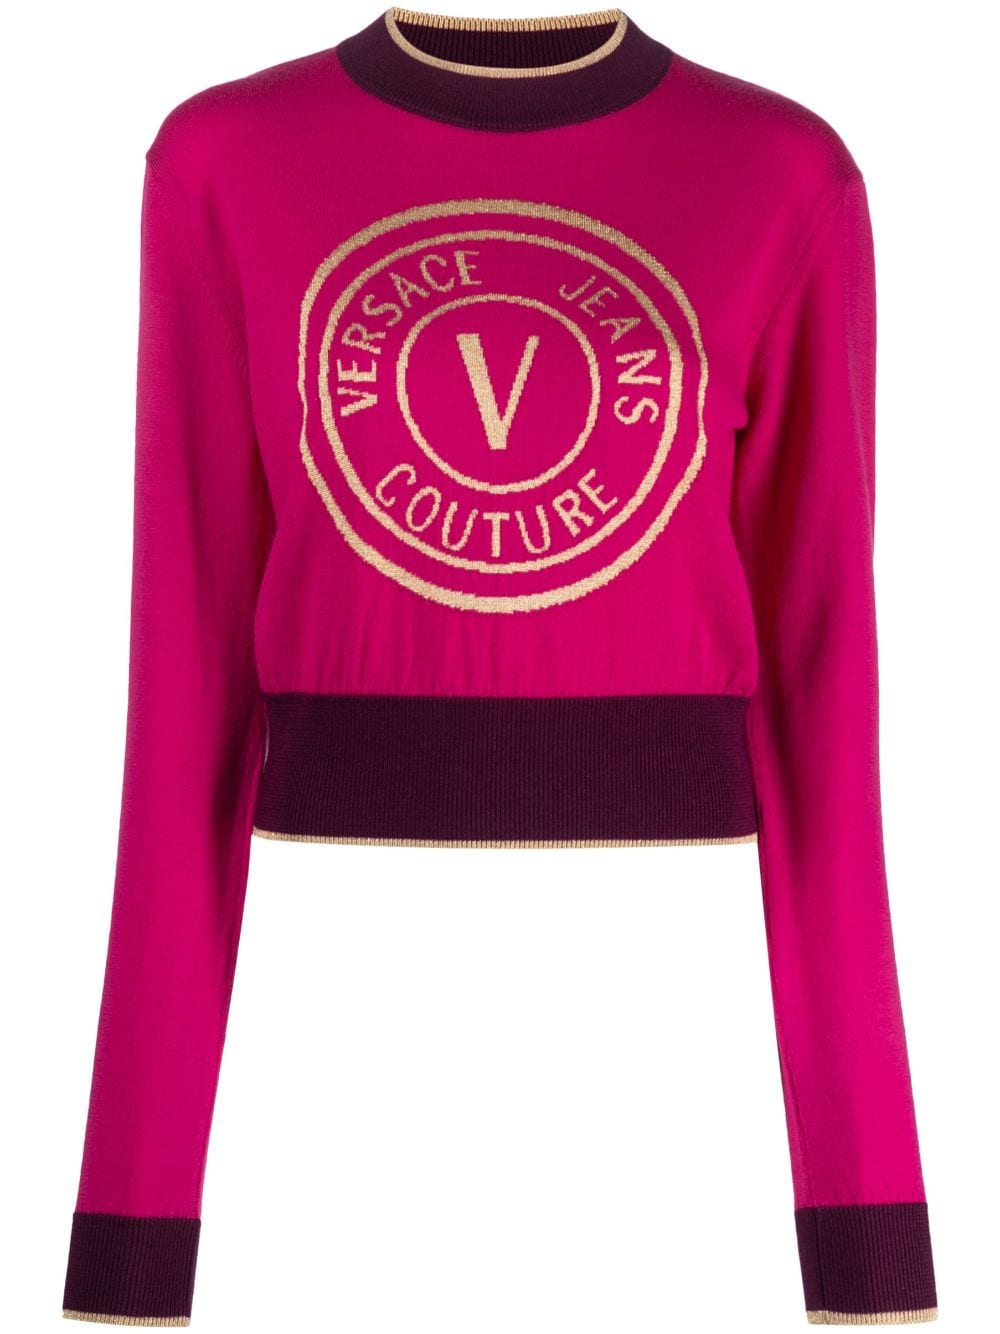 Versace Jeans Couture intarsia-knit logo jumper - Pink von Versace Jeans Couture